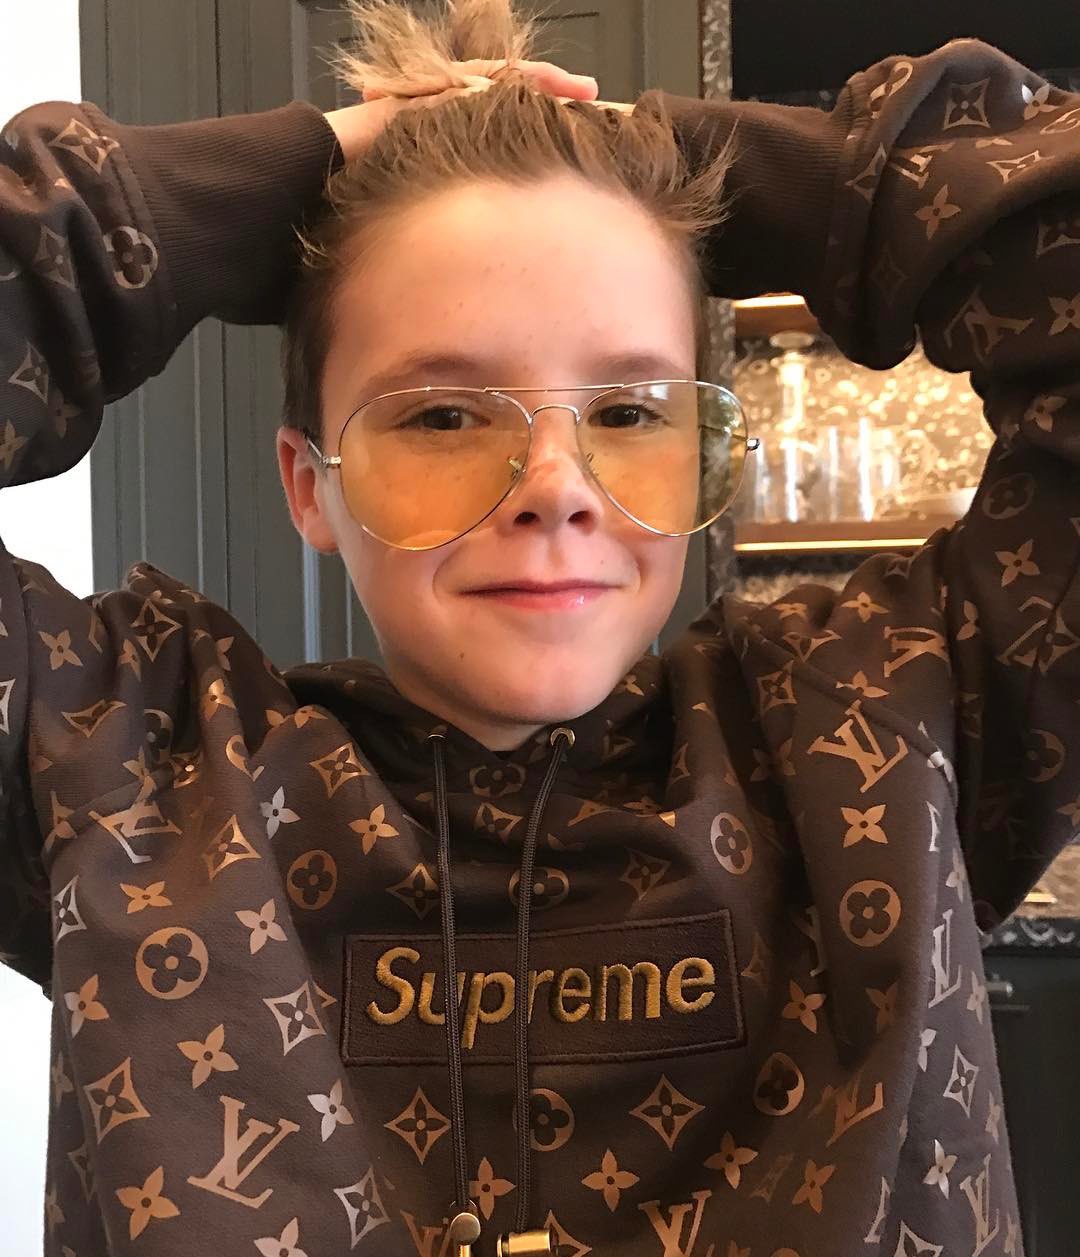 Ovrnundr on Twitter: "Supreme x Louis Vuitton 1 1 hoodie is being sold by @CruzBeckham gifted to by Kim Jones only the “Red” colourway was released to the public.